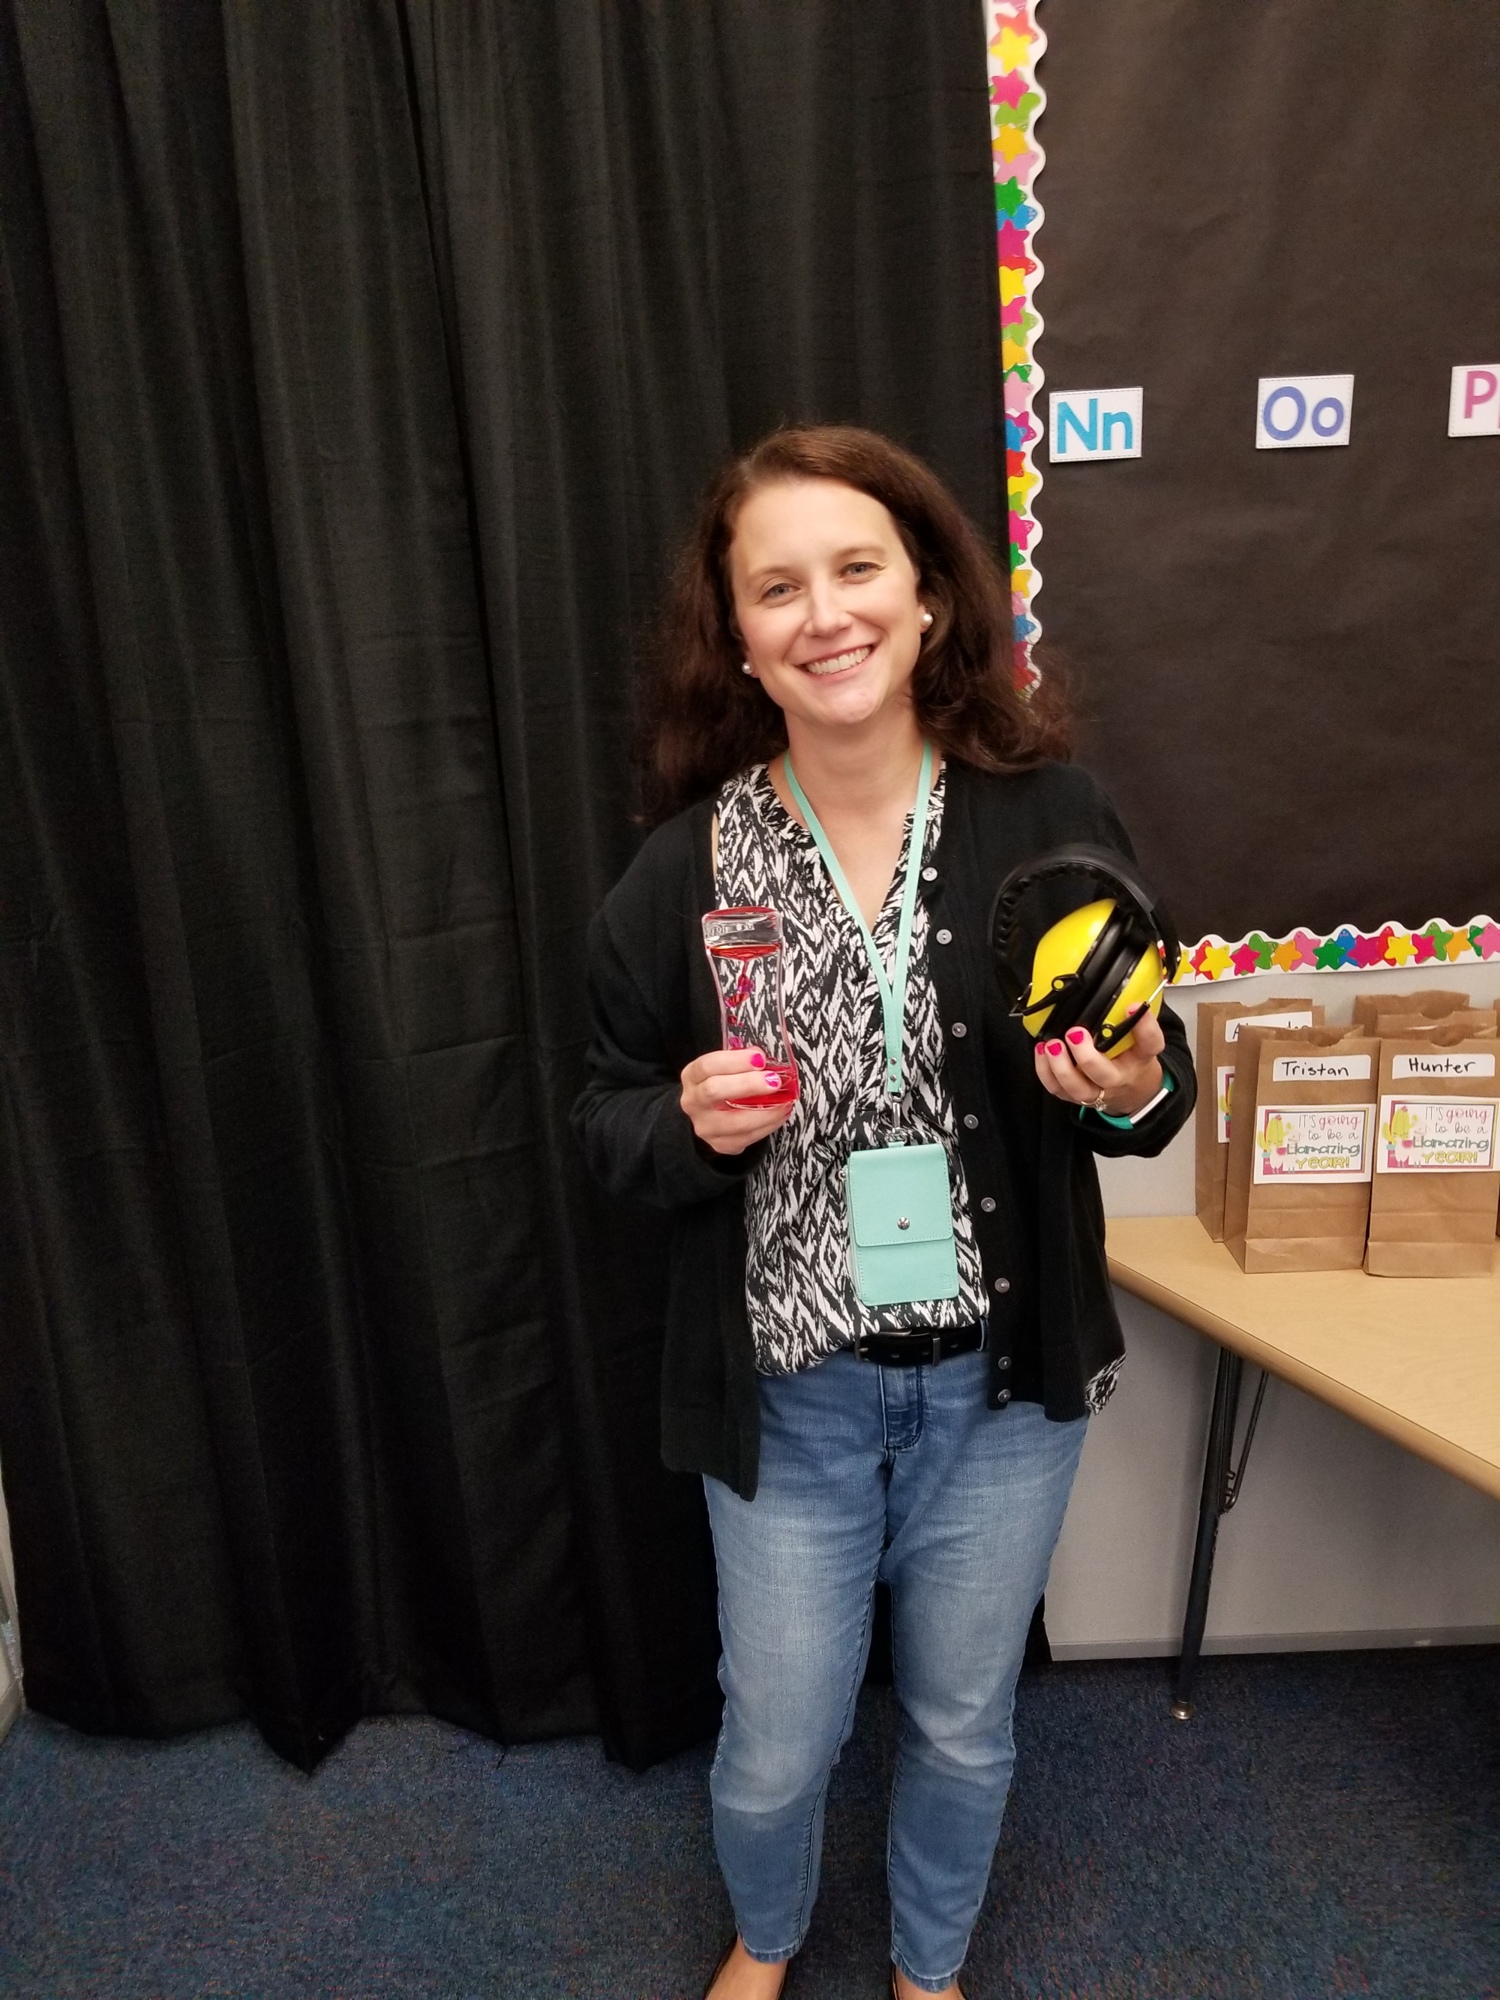 Sarah Jett, a teacher at Freedom Elementary, shares some of the items that were donated to her from her wish list. Jett says the support from the community gives teachers added strength to return to the classroom. Courtesy photo.